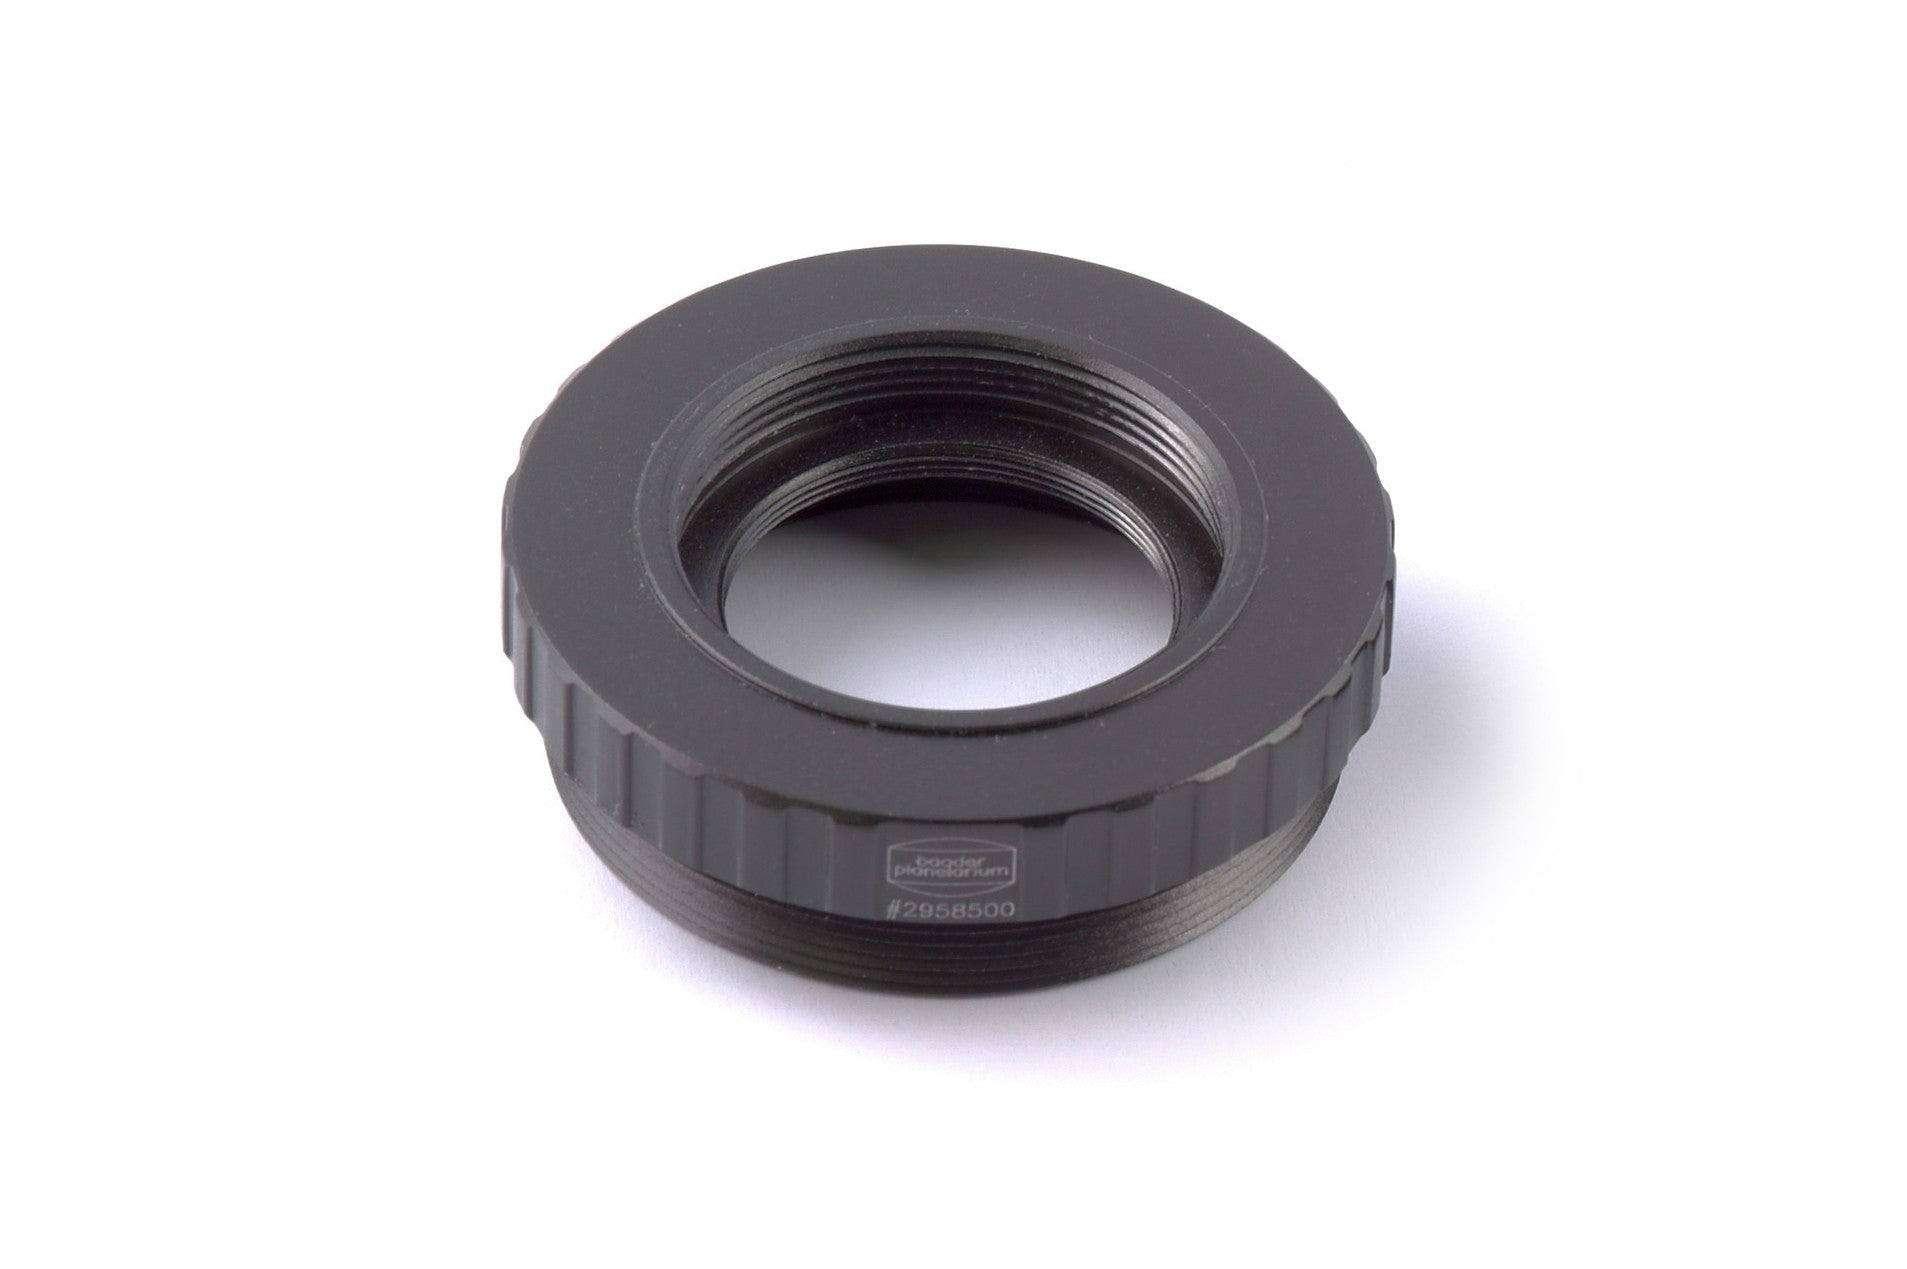 Baader Planetarium Accessory Baader 2" NX4 (C90)/ETX Expanding Ring, Converts NX4 straight male thread to 2" SC thread (component part of 2958500) - 2958500A